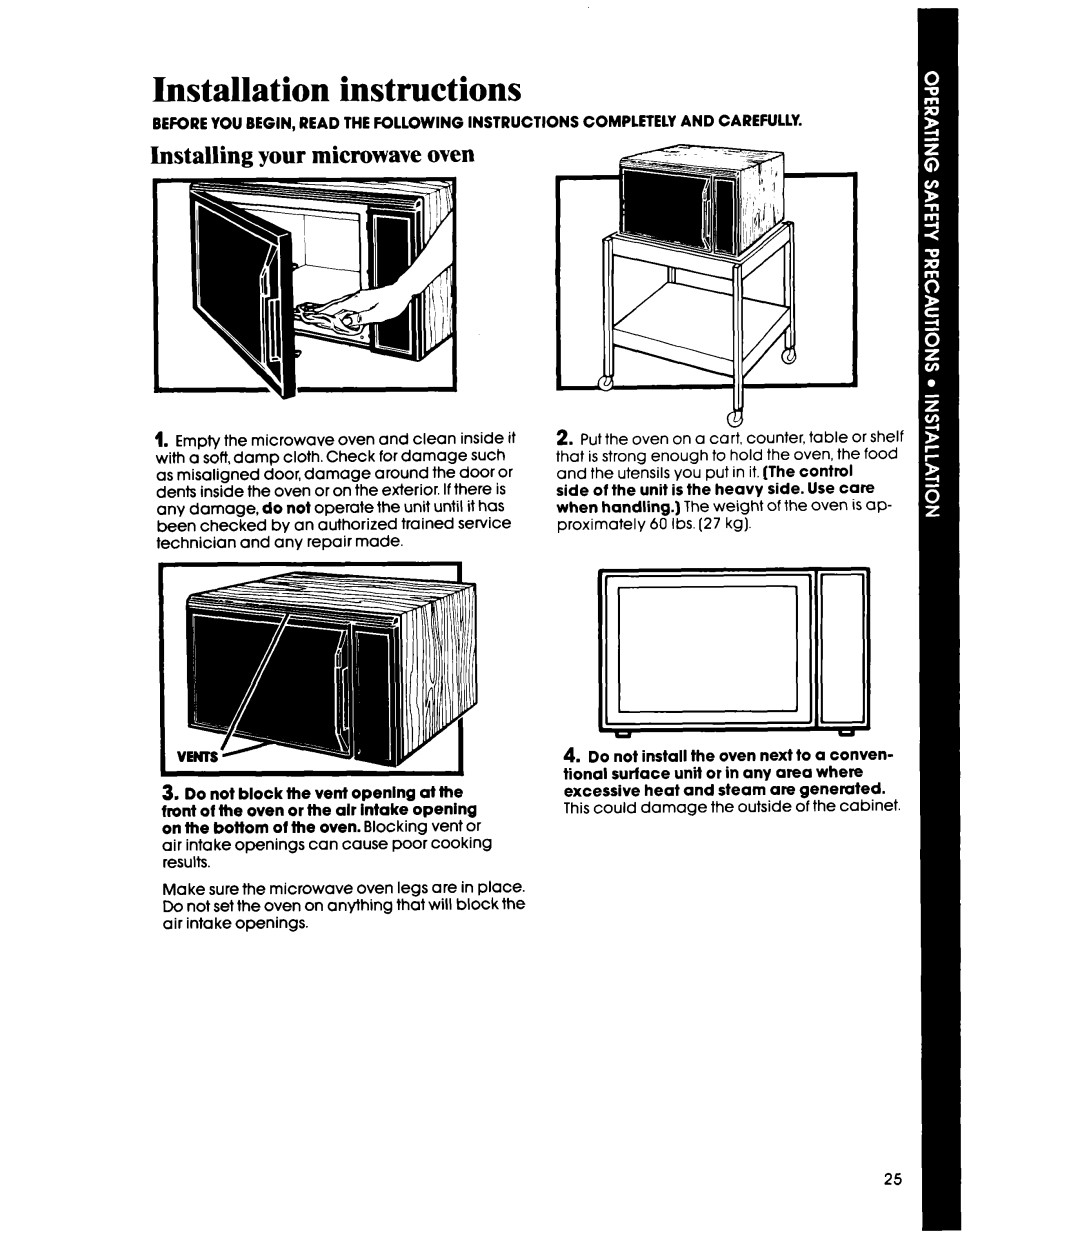 Whirlpool MW8570XR manual Installation instructions, Installing your microwave oven 